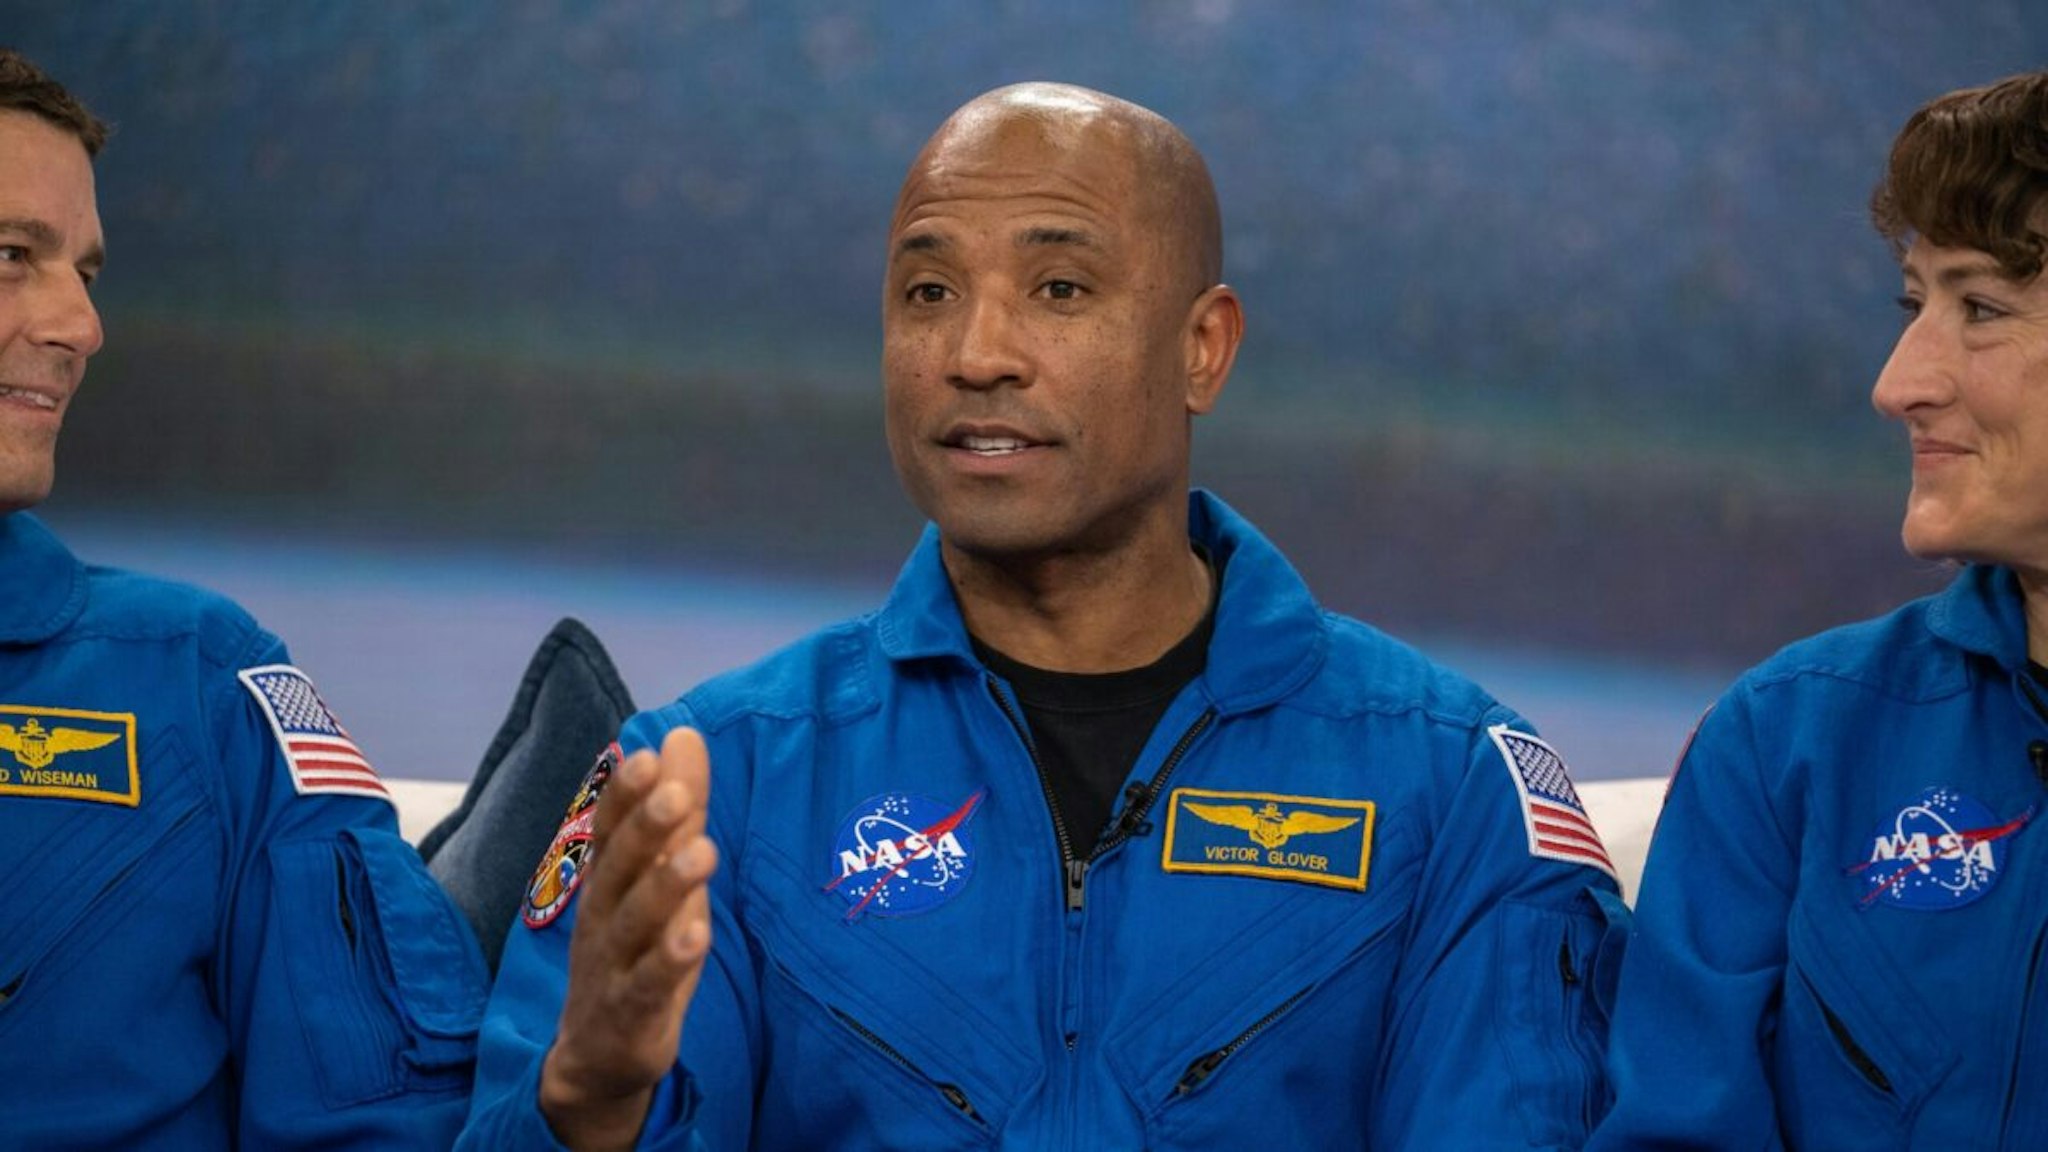 TODAY -- Pictured: Artemis astronaut Victor Glover on Thursday, April 6, 2023